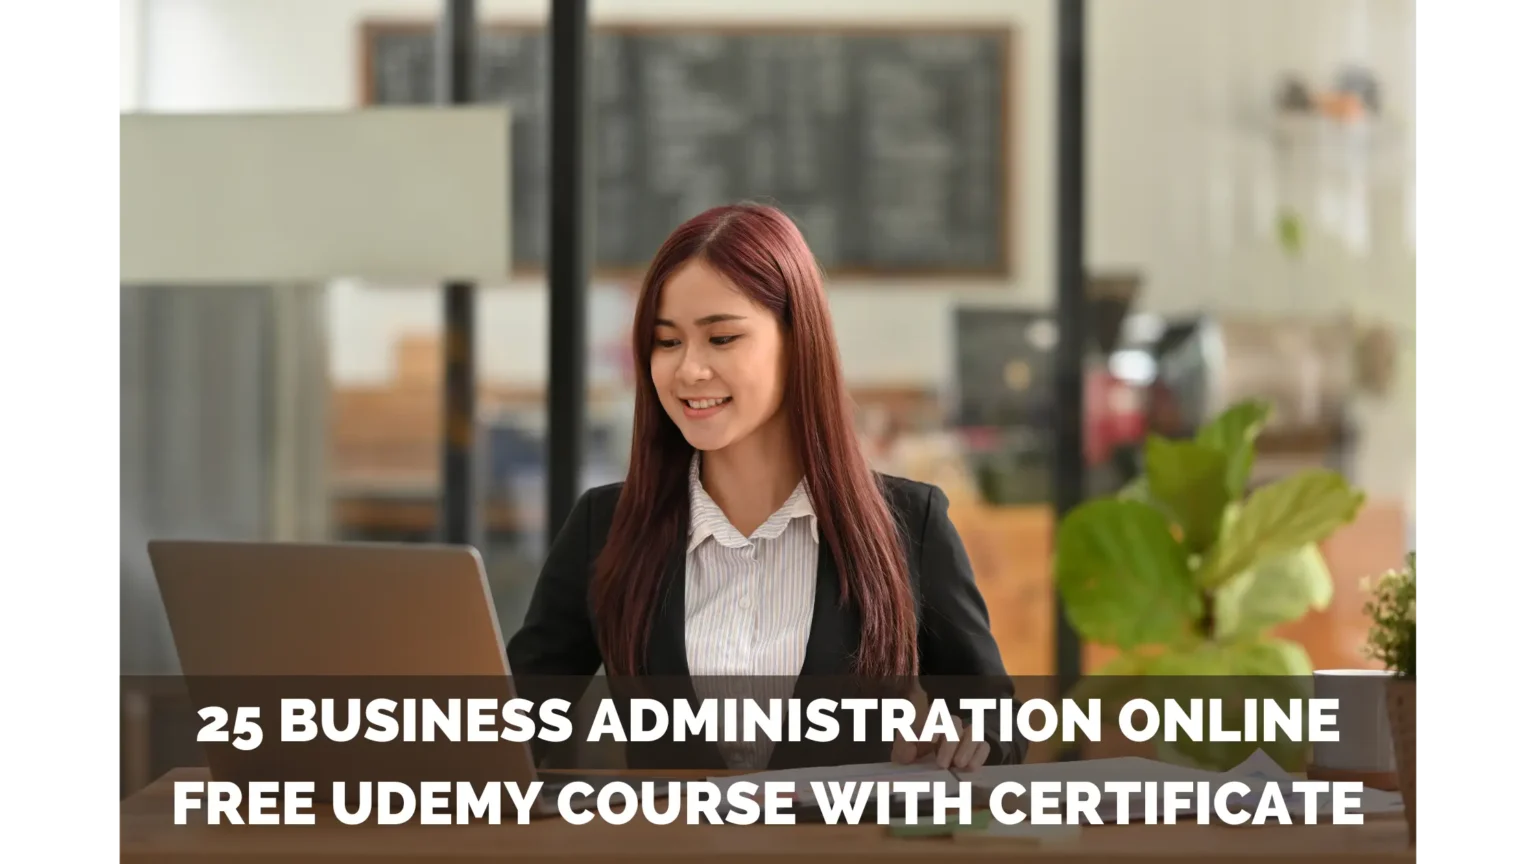 25 Business Administration Online Free Udemy Course With Certificate